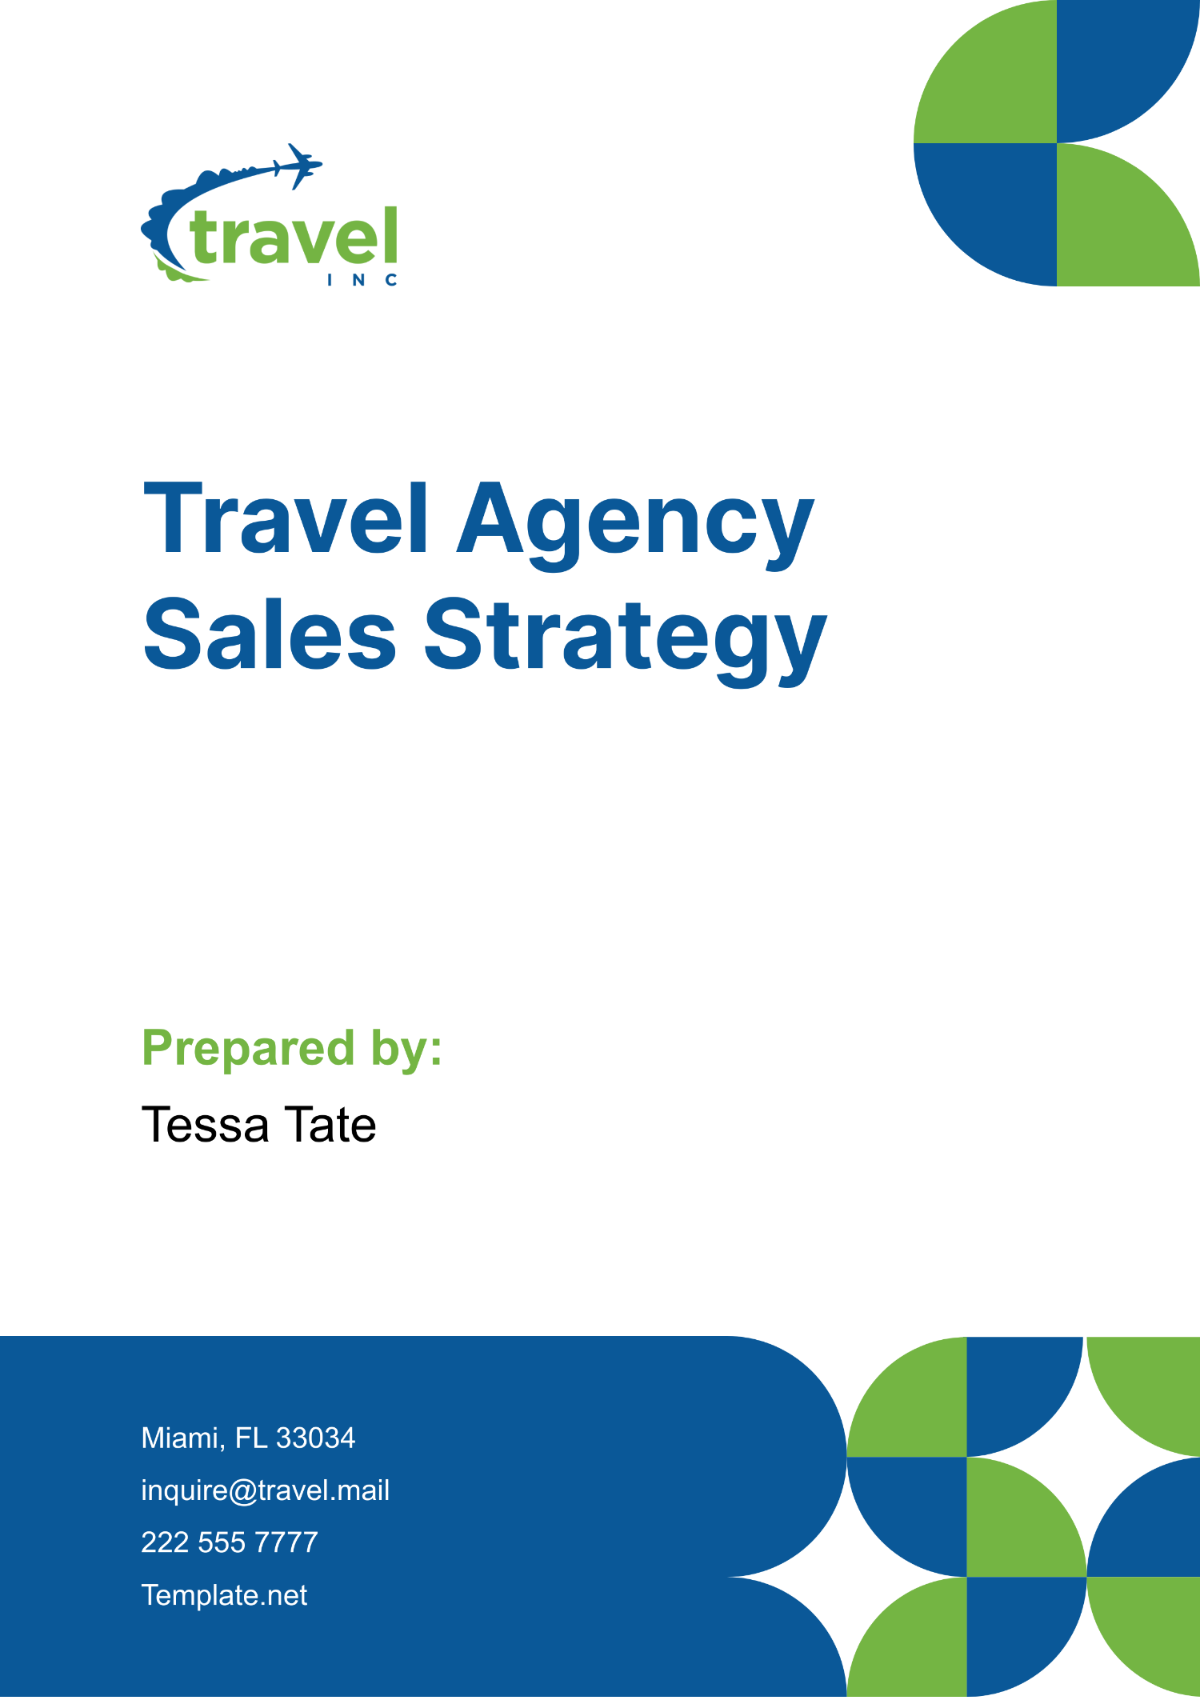 Travel Agency Sales Strategy Template